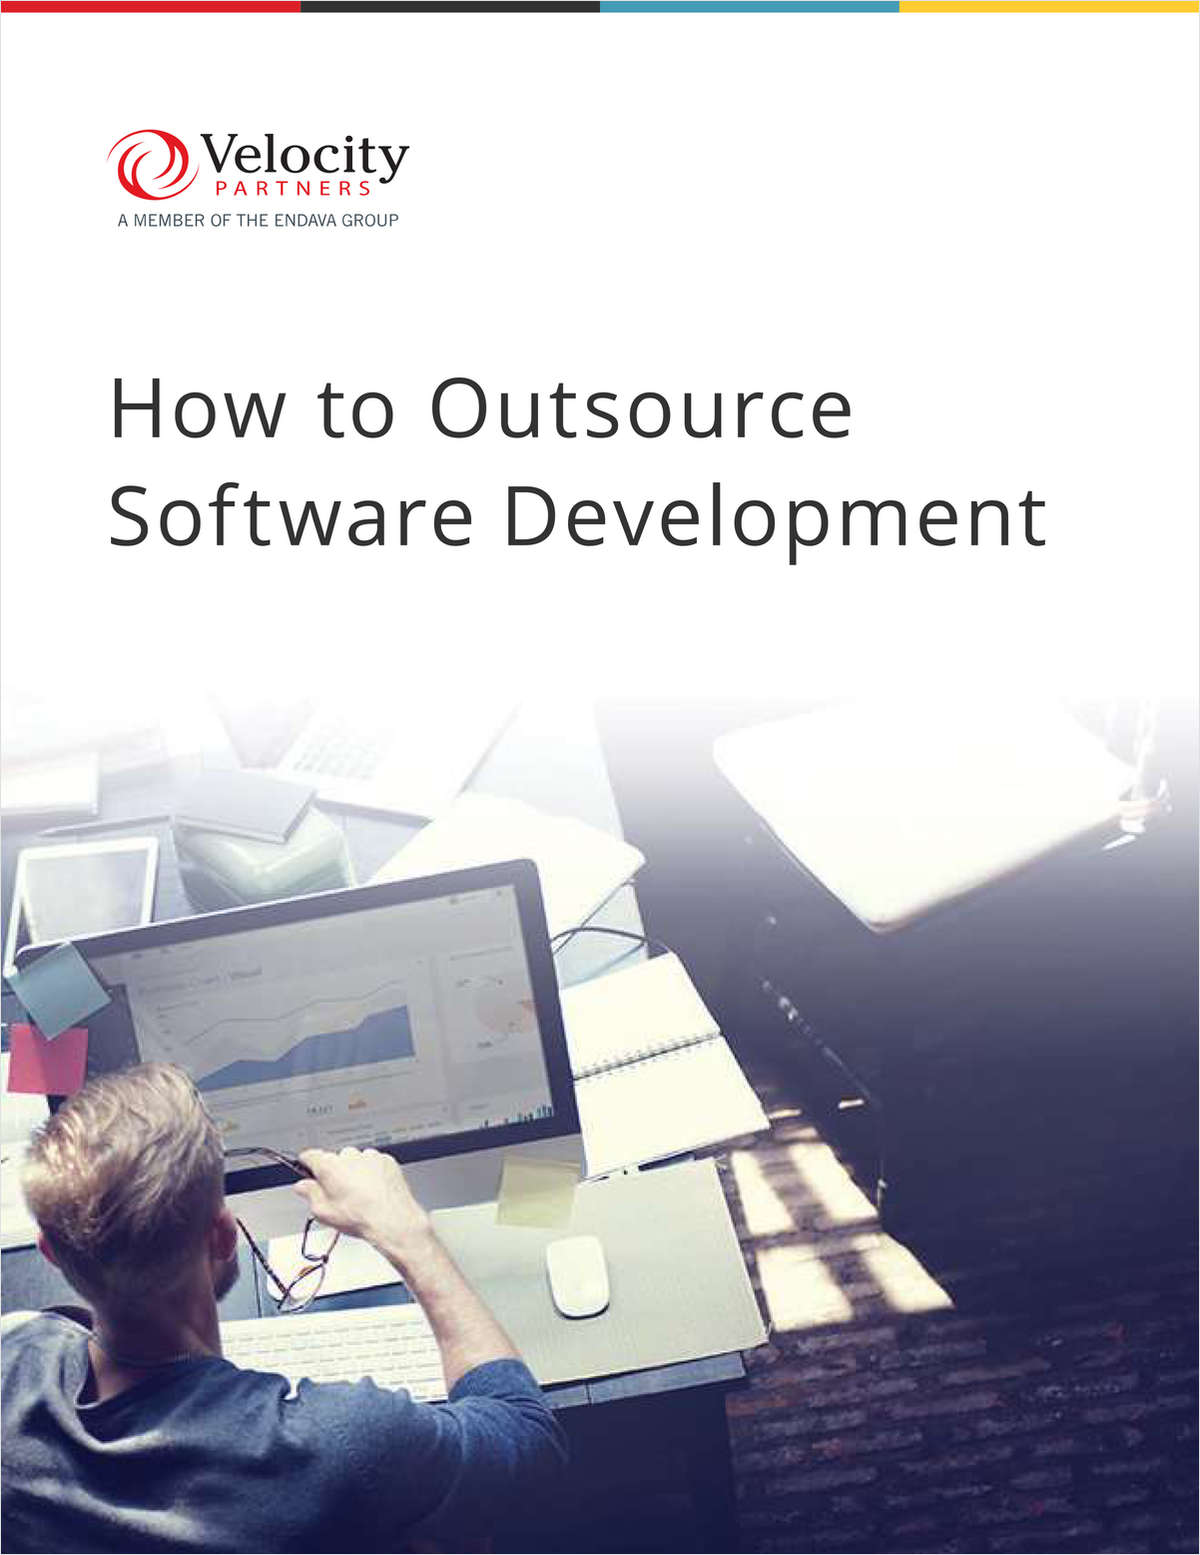 Learn the Right Way to Outsource Software Development